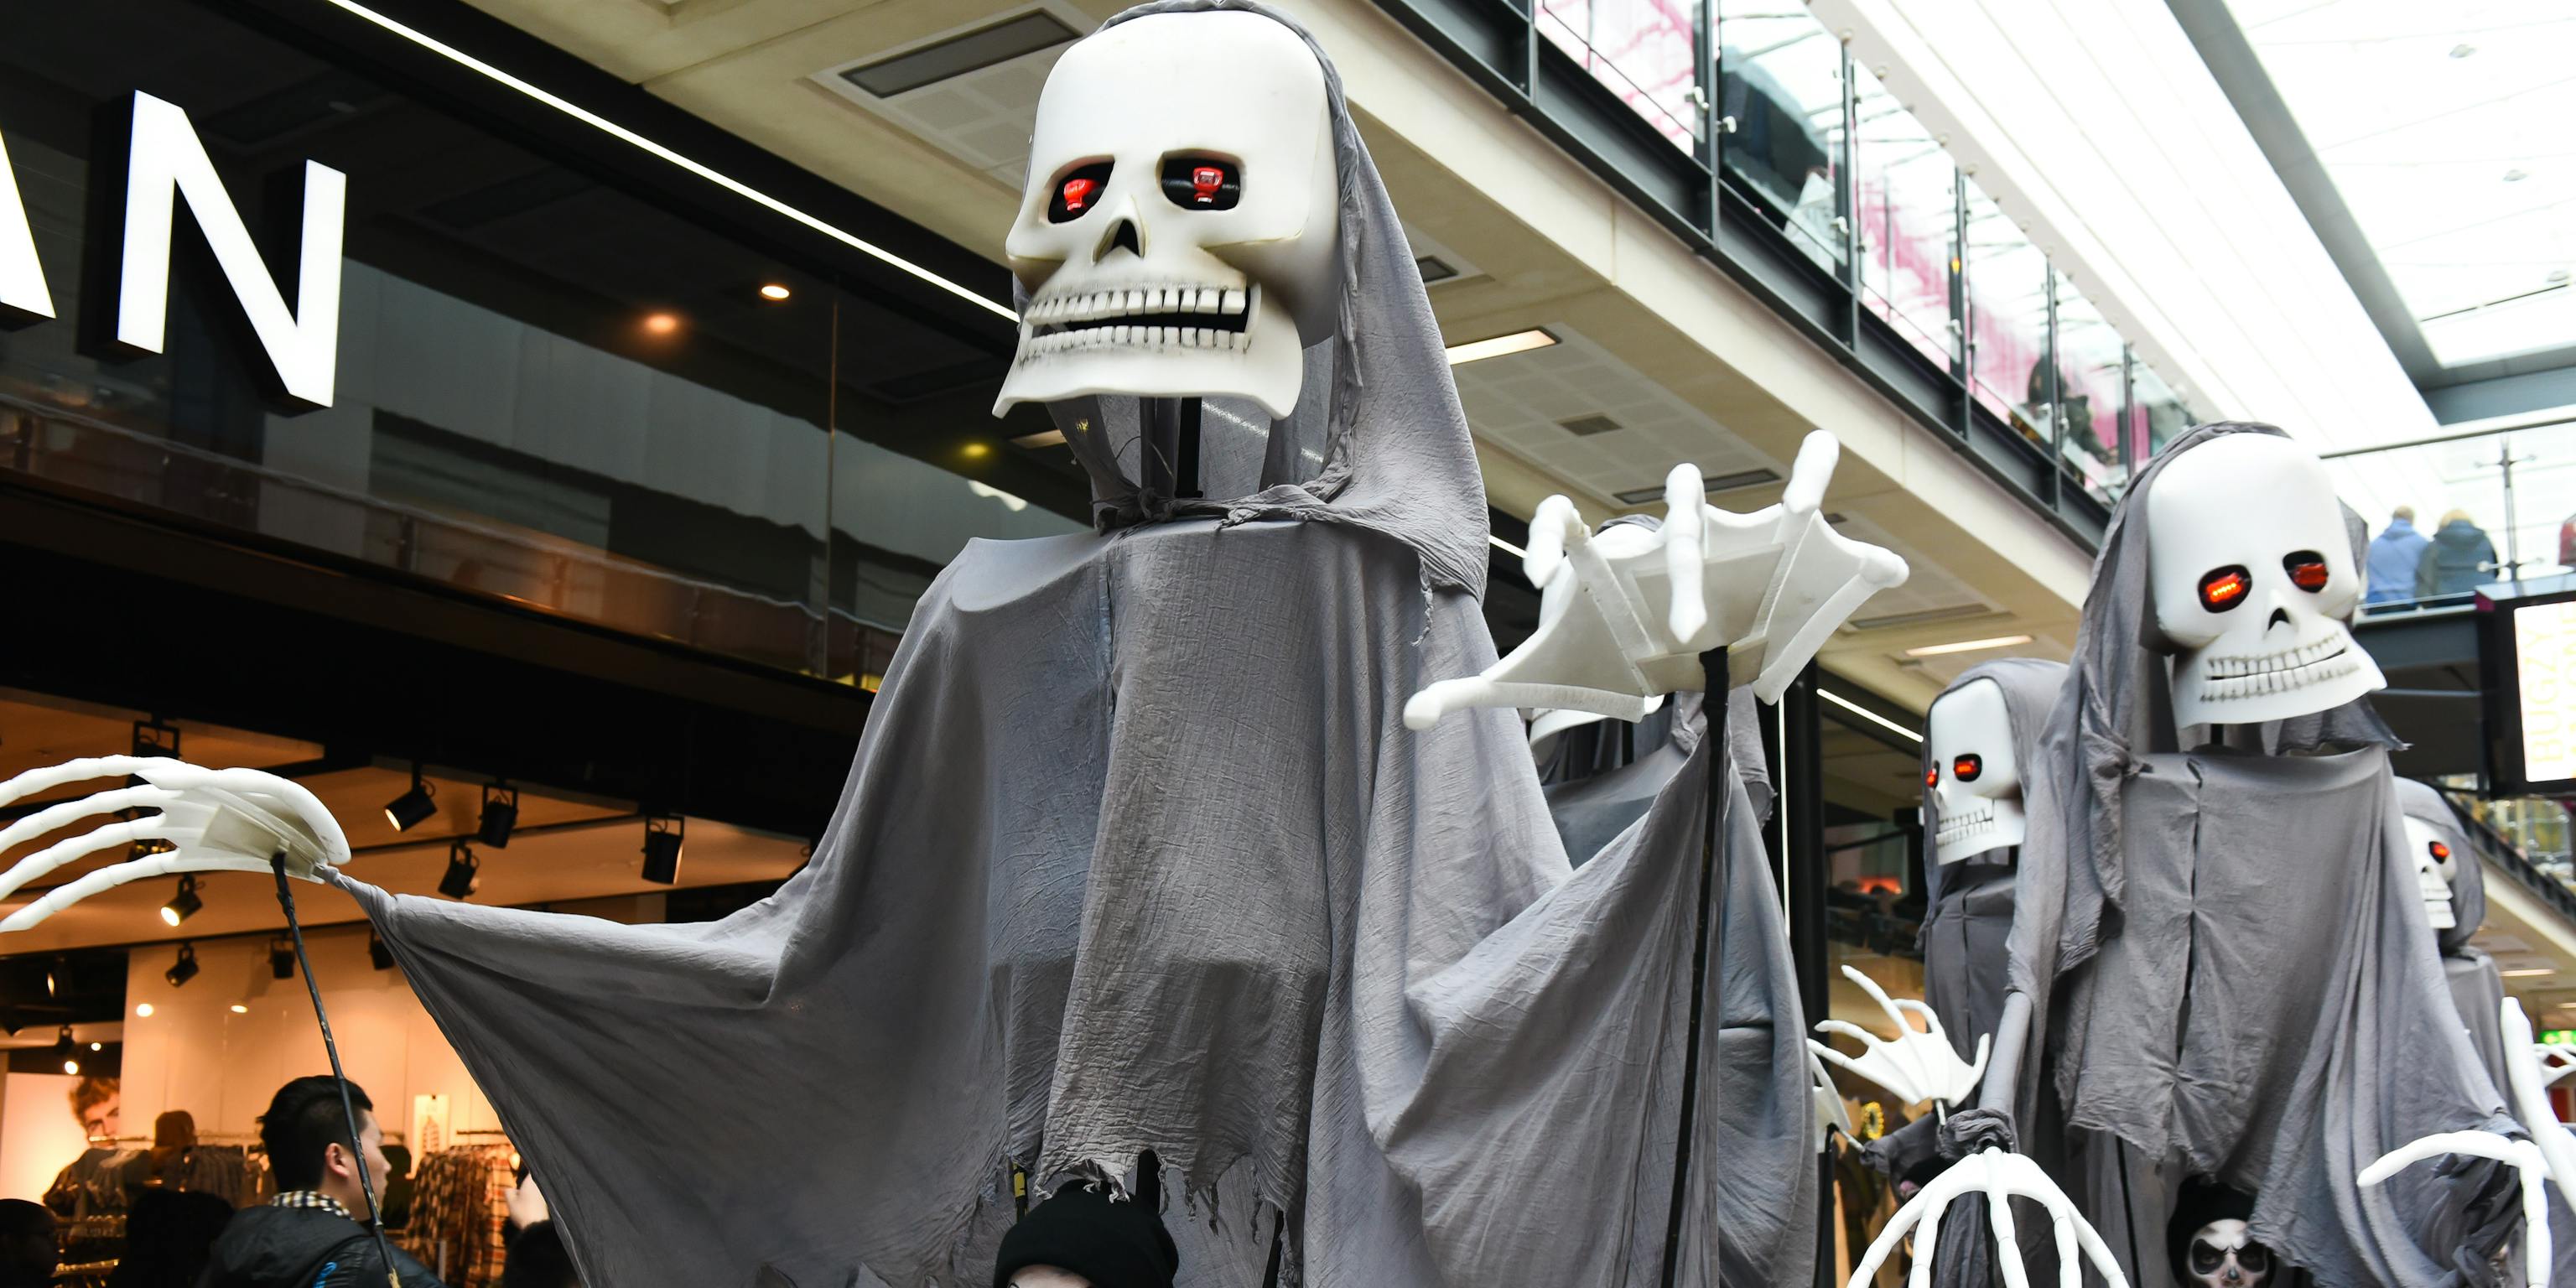 A procession of large skeleton puppets